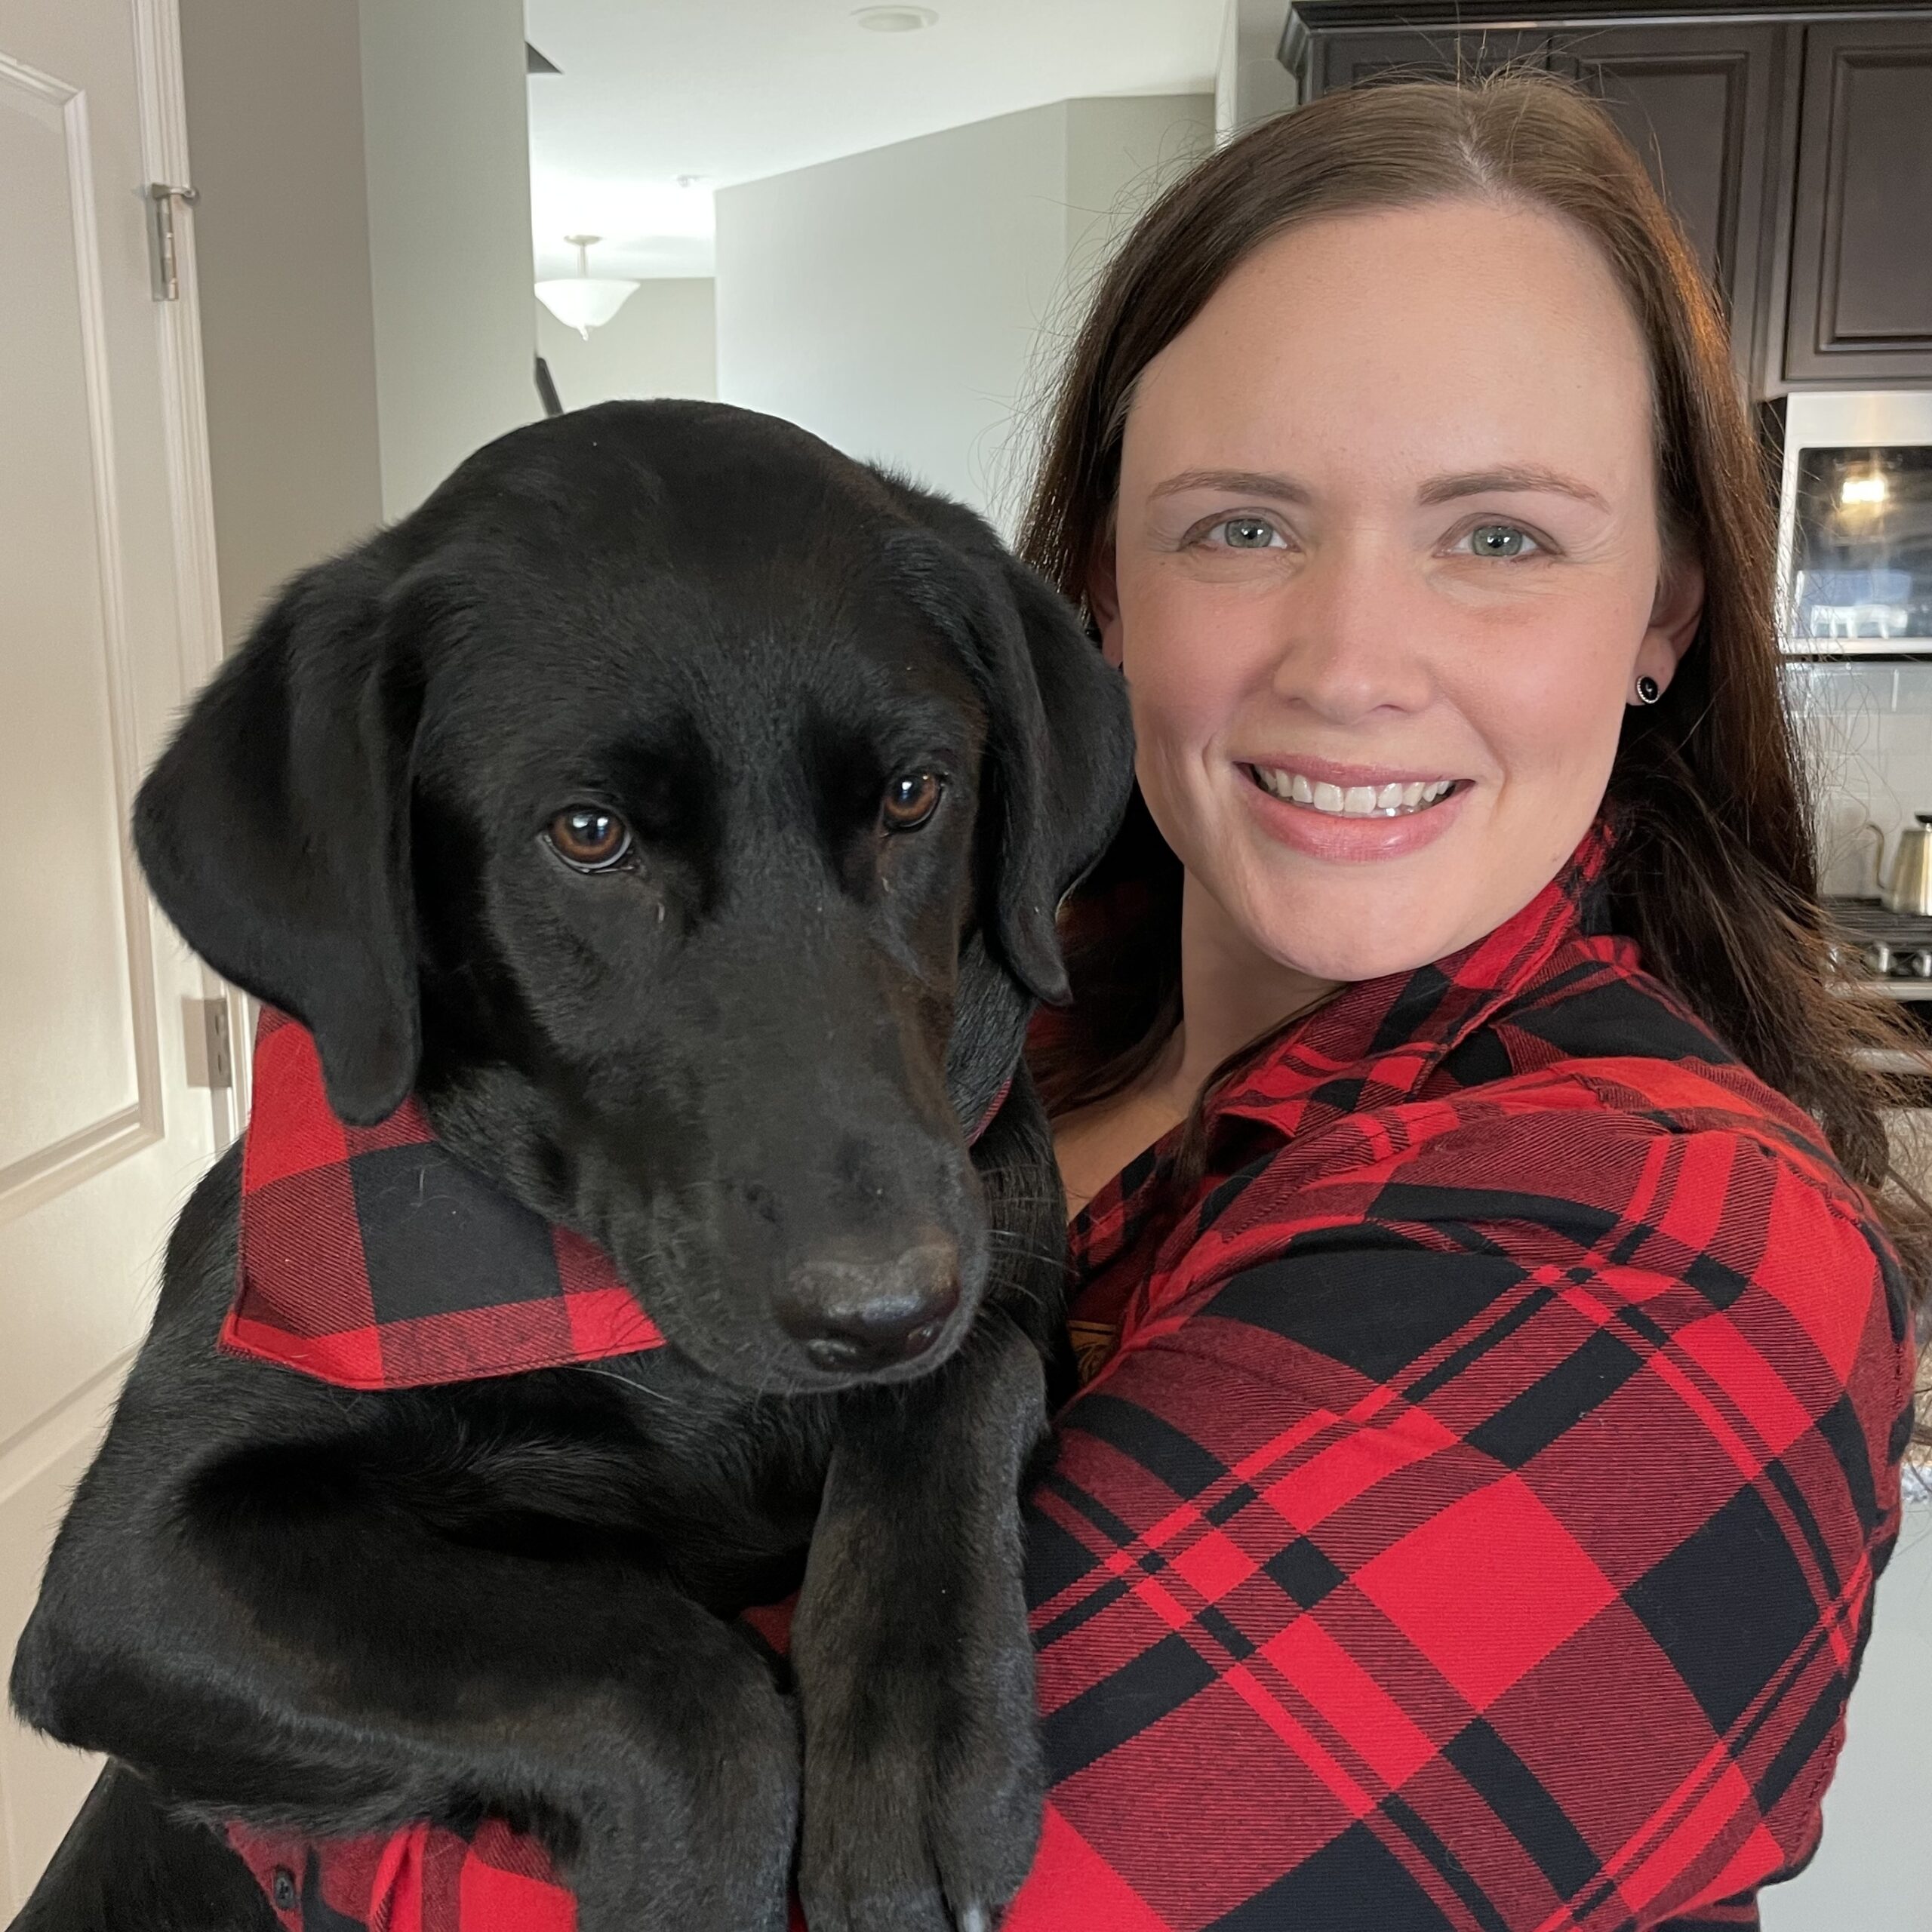 Woman with brown hair and black and red flannel shirt holds her dog, a black labrador